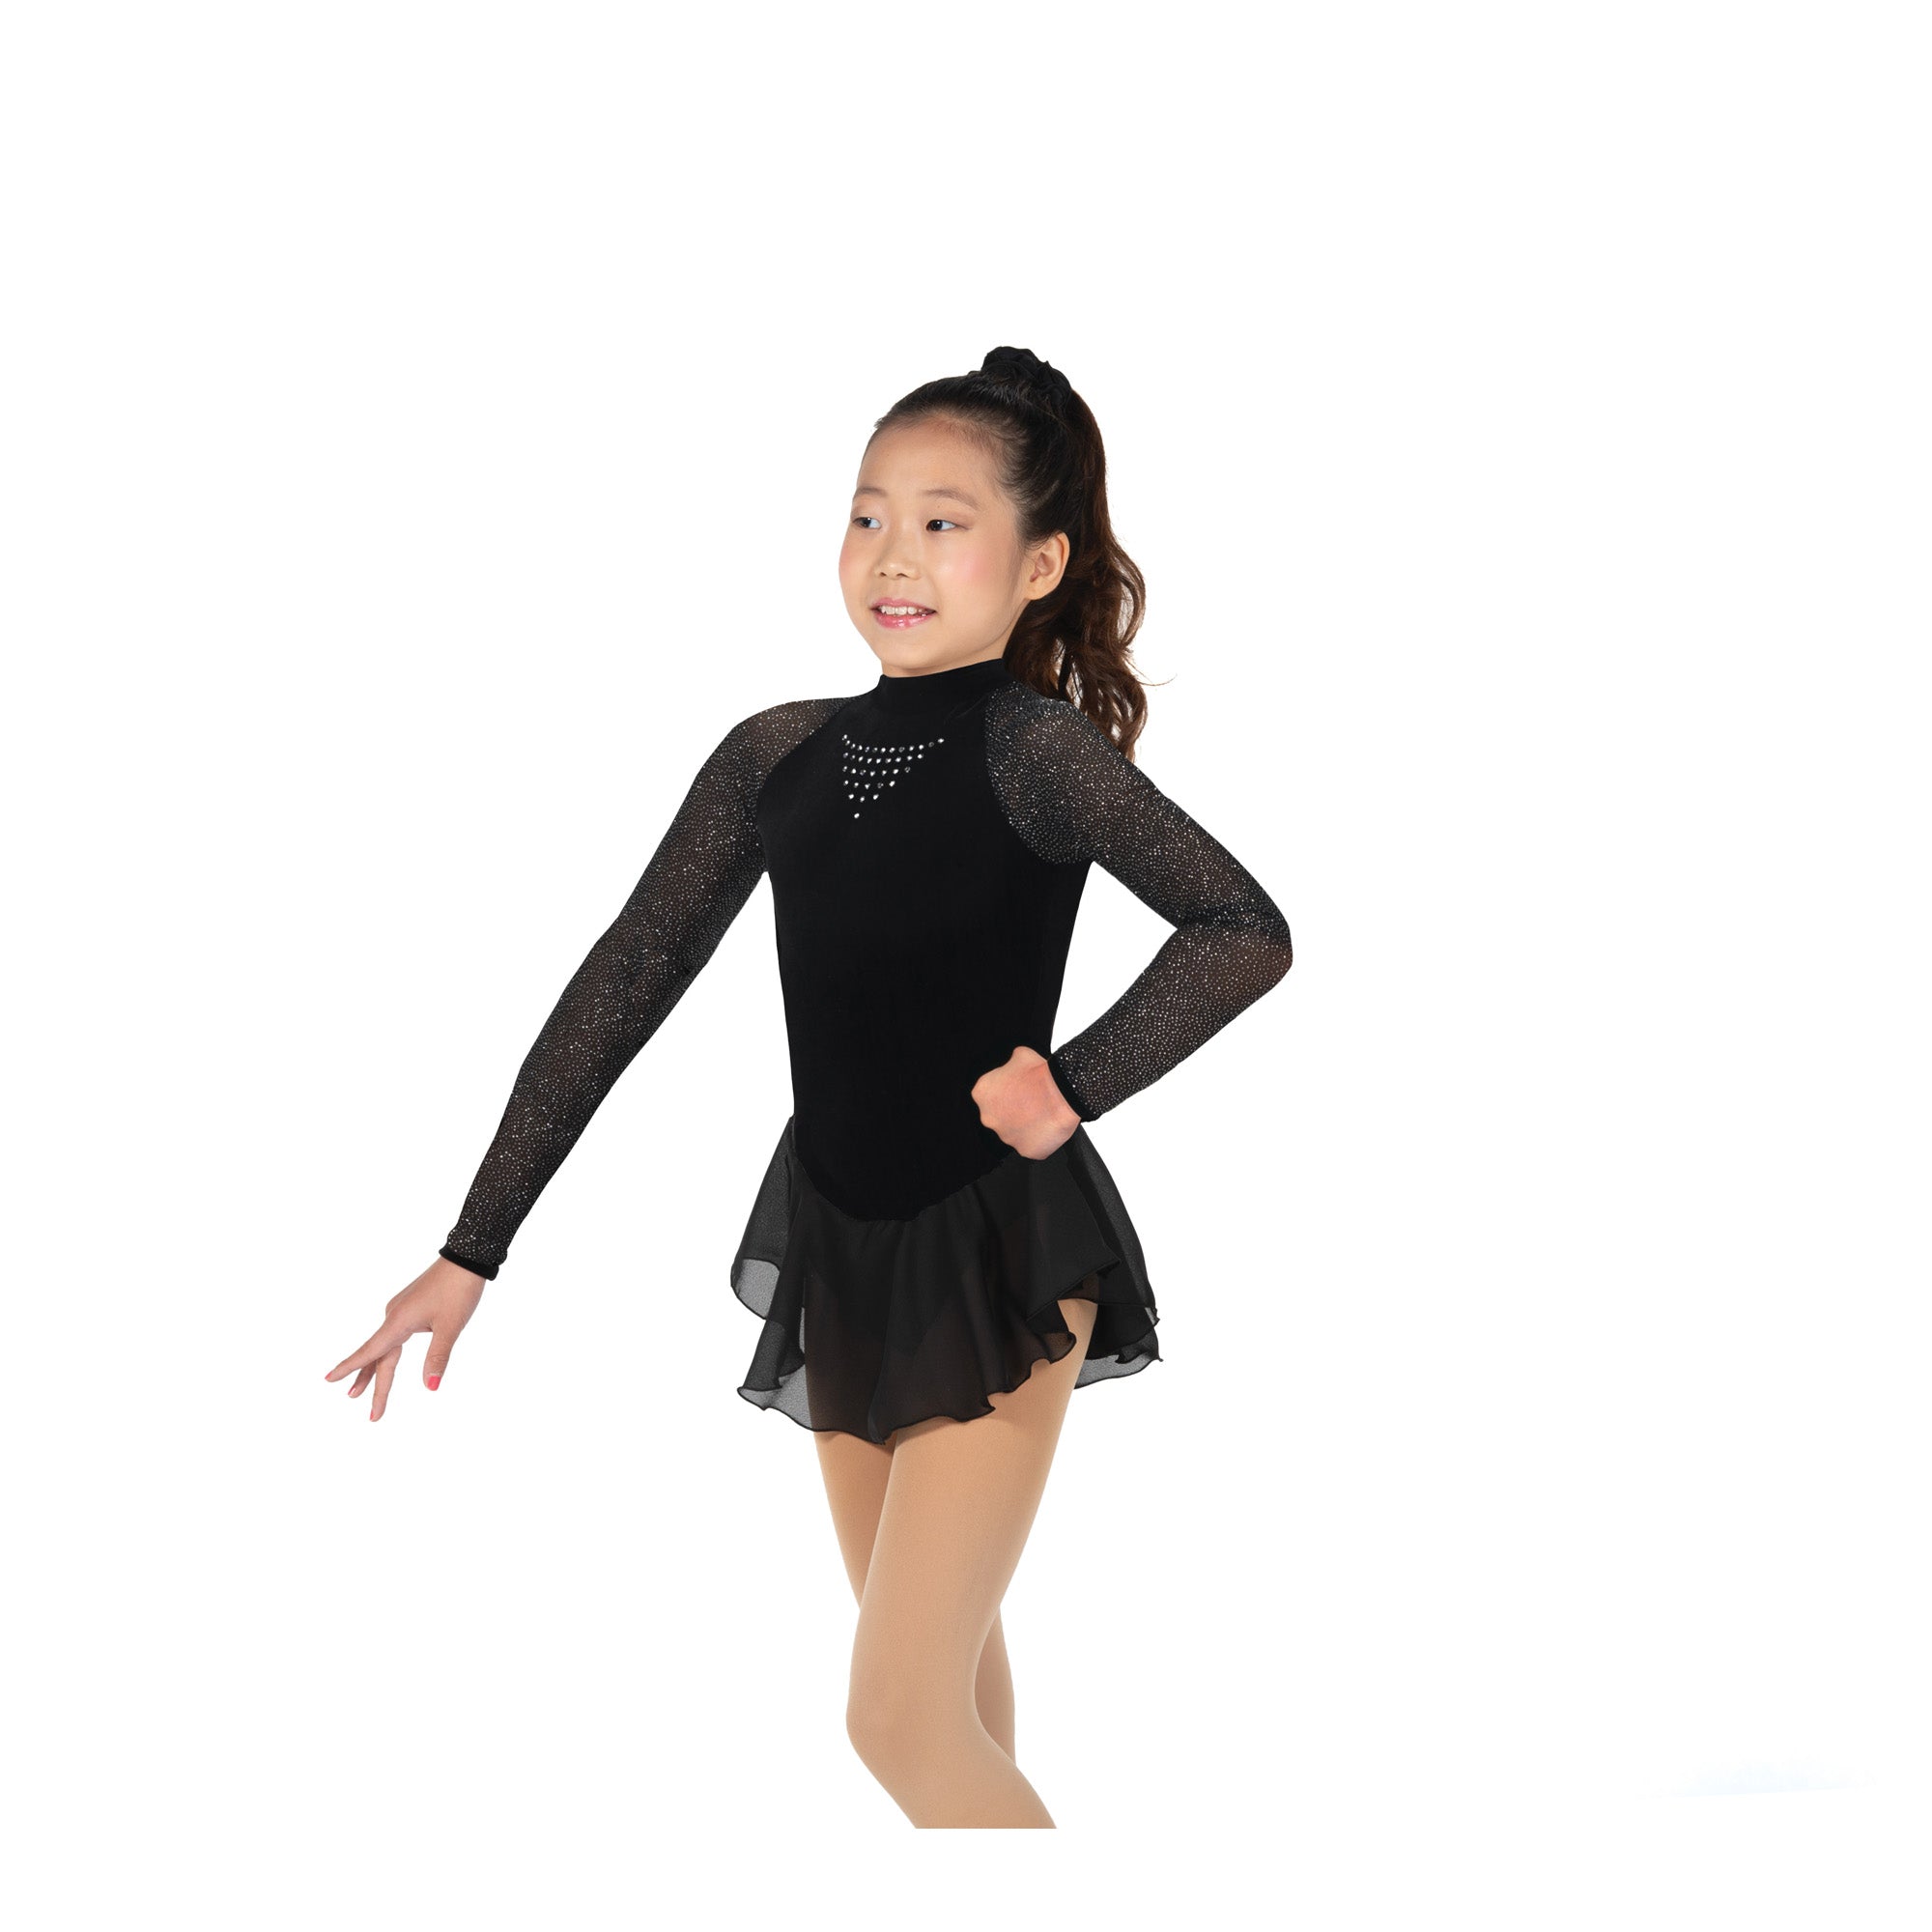 189 Starbrite Skating Dress in Black by Jerry's